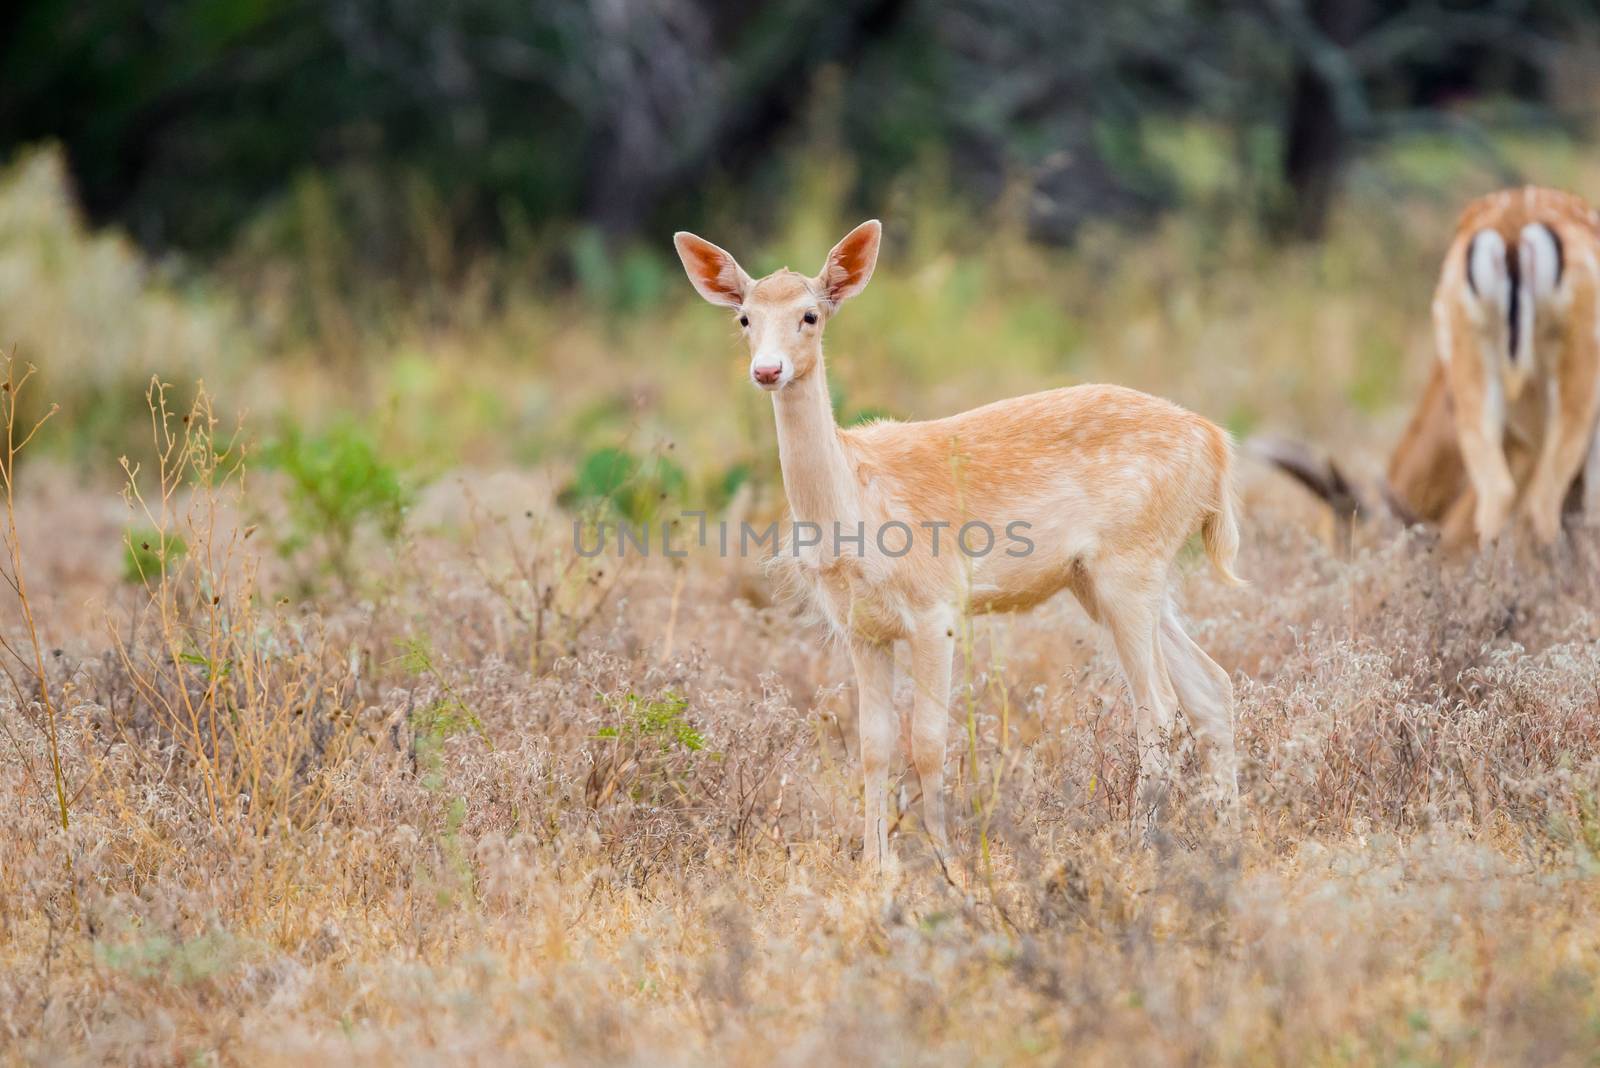 Wild South Texas spotted fallow deer fawn